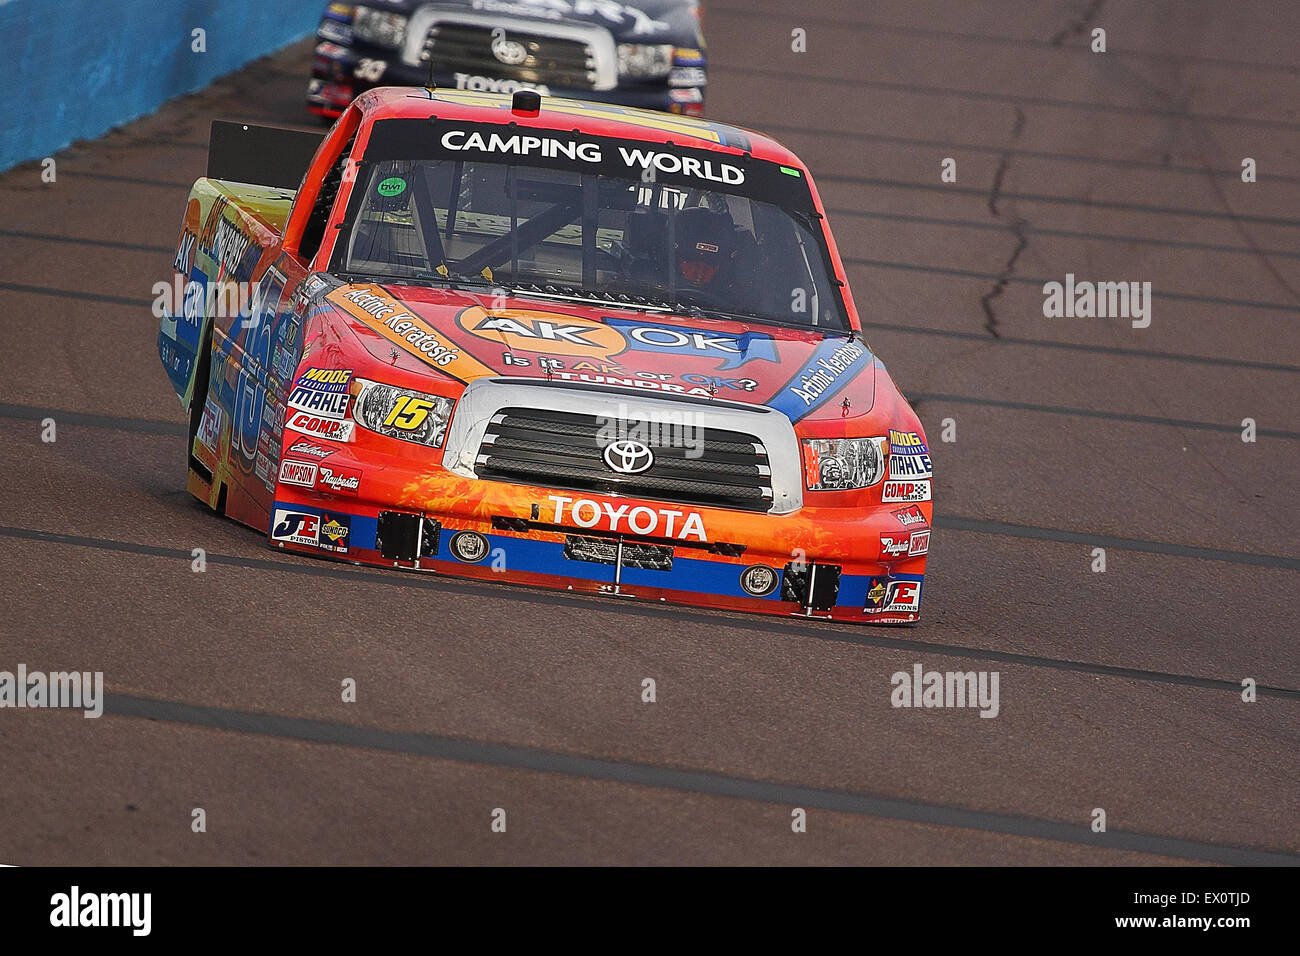 AVONDALE, AZ - NOV. 12: Aric Almirola (15) takes laps in a practice session for the NASCAR Camping World Truck Series Stock Photo